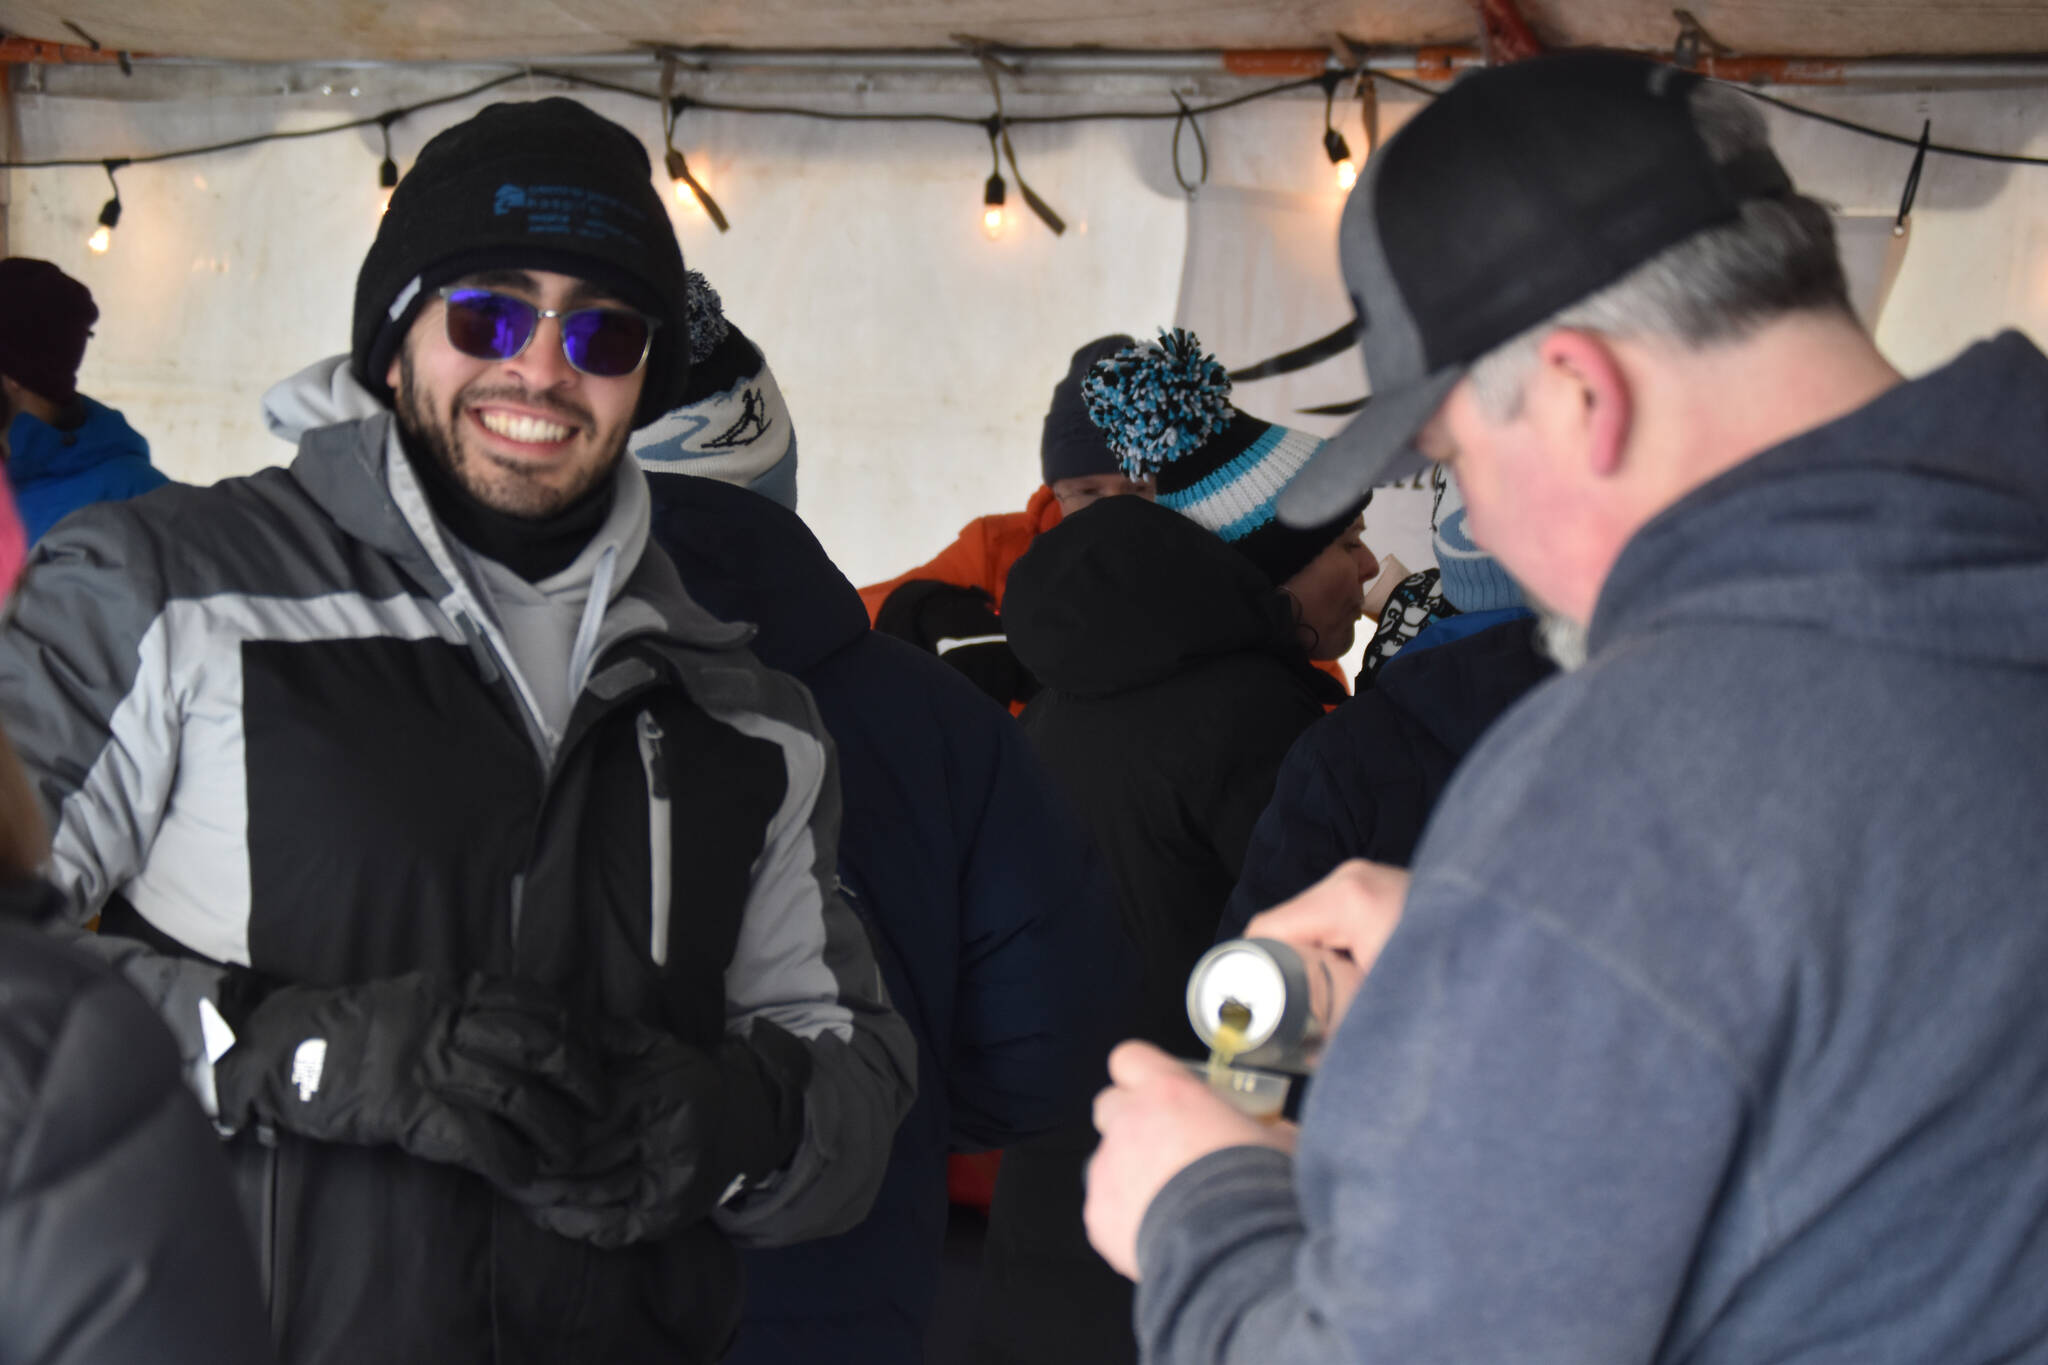 An attendee gets a drink from HooDoo Brewing Company during Frozen RiverFest on Saturday, Feb. 18, 2023 at Soldotna Creek Park in Soldotna, Alaska. (Jake Dye/Peninsula Clarion)